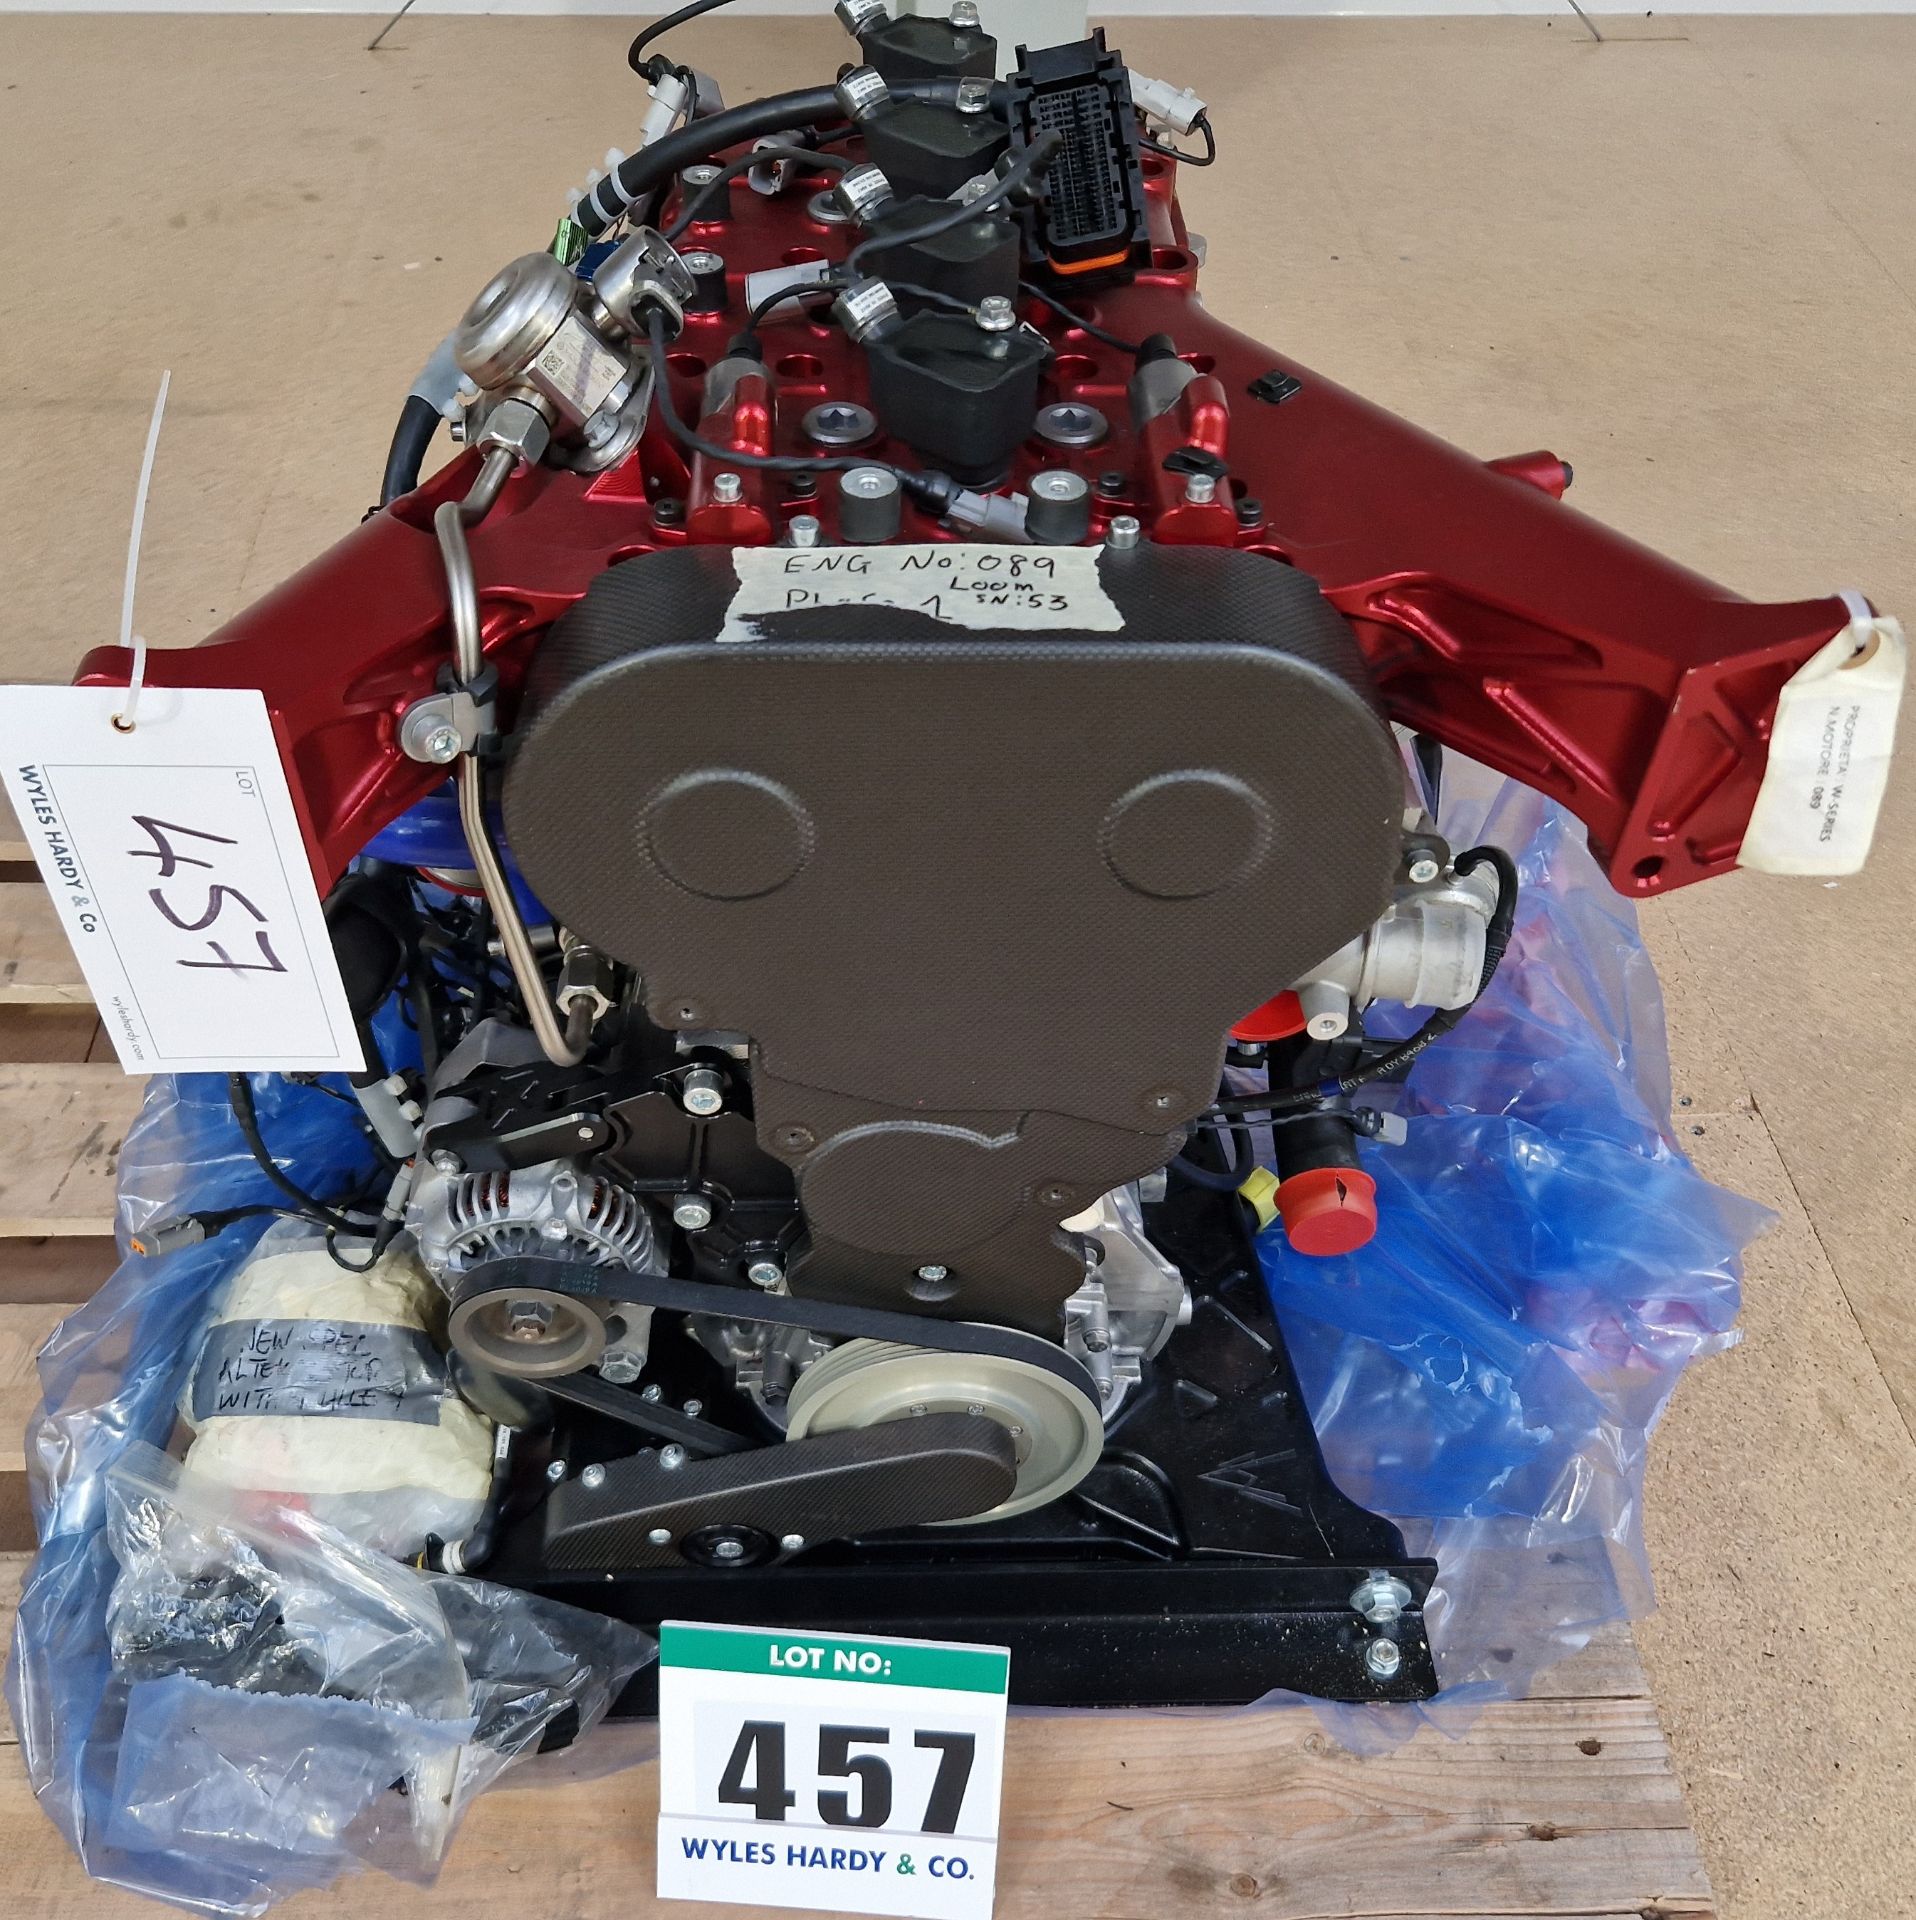 One ALPHA ROMEO 1.75L Twin Overhead Cam Turbocharged Race Car Engine, No. 089, known to be